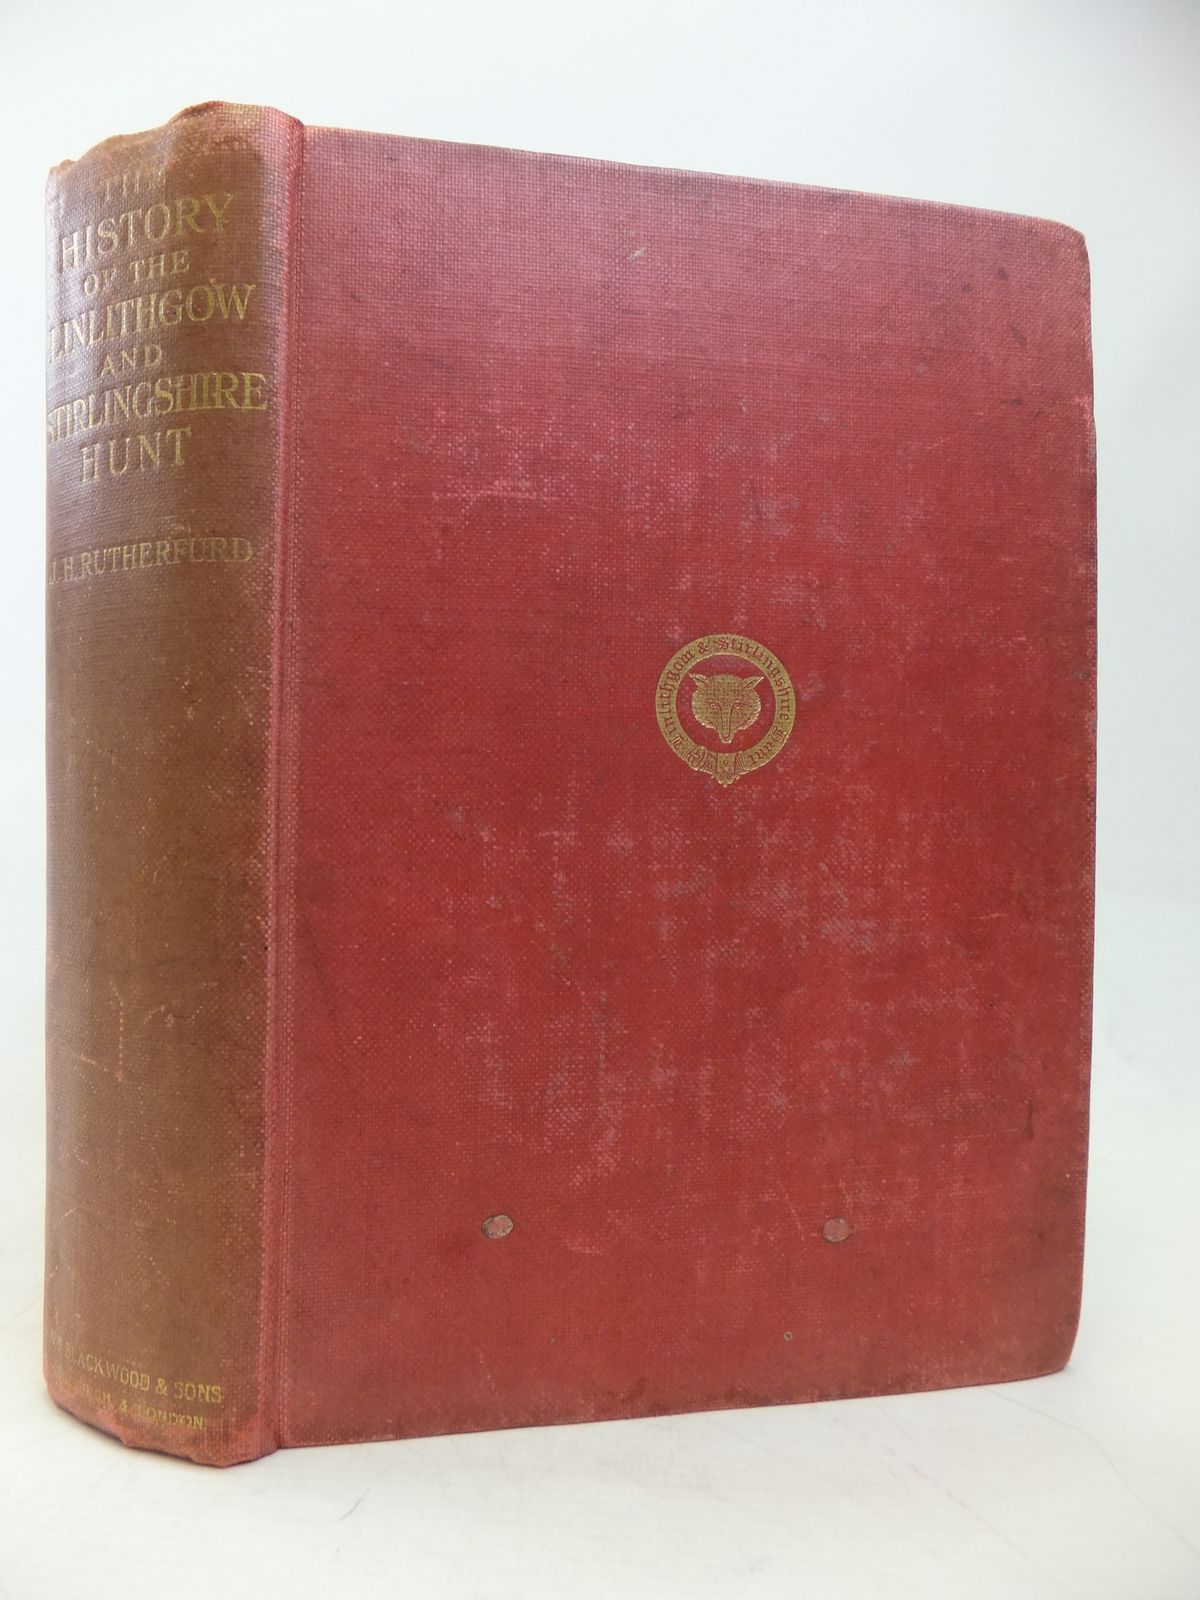 Photo of THE HISTORY OF THE LINLITHGOW AND STIRLINGSHIRE HUNT 1775-1910 written by Rutherfurd, James H. published by William Blackwood and Sons (STOCK CODE: 1810090)  for sale by Stella & Rose's Books